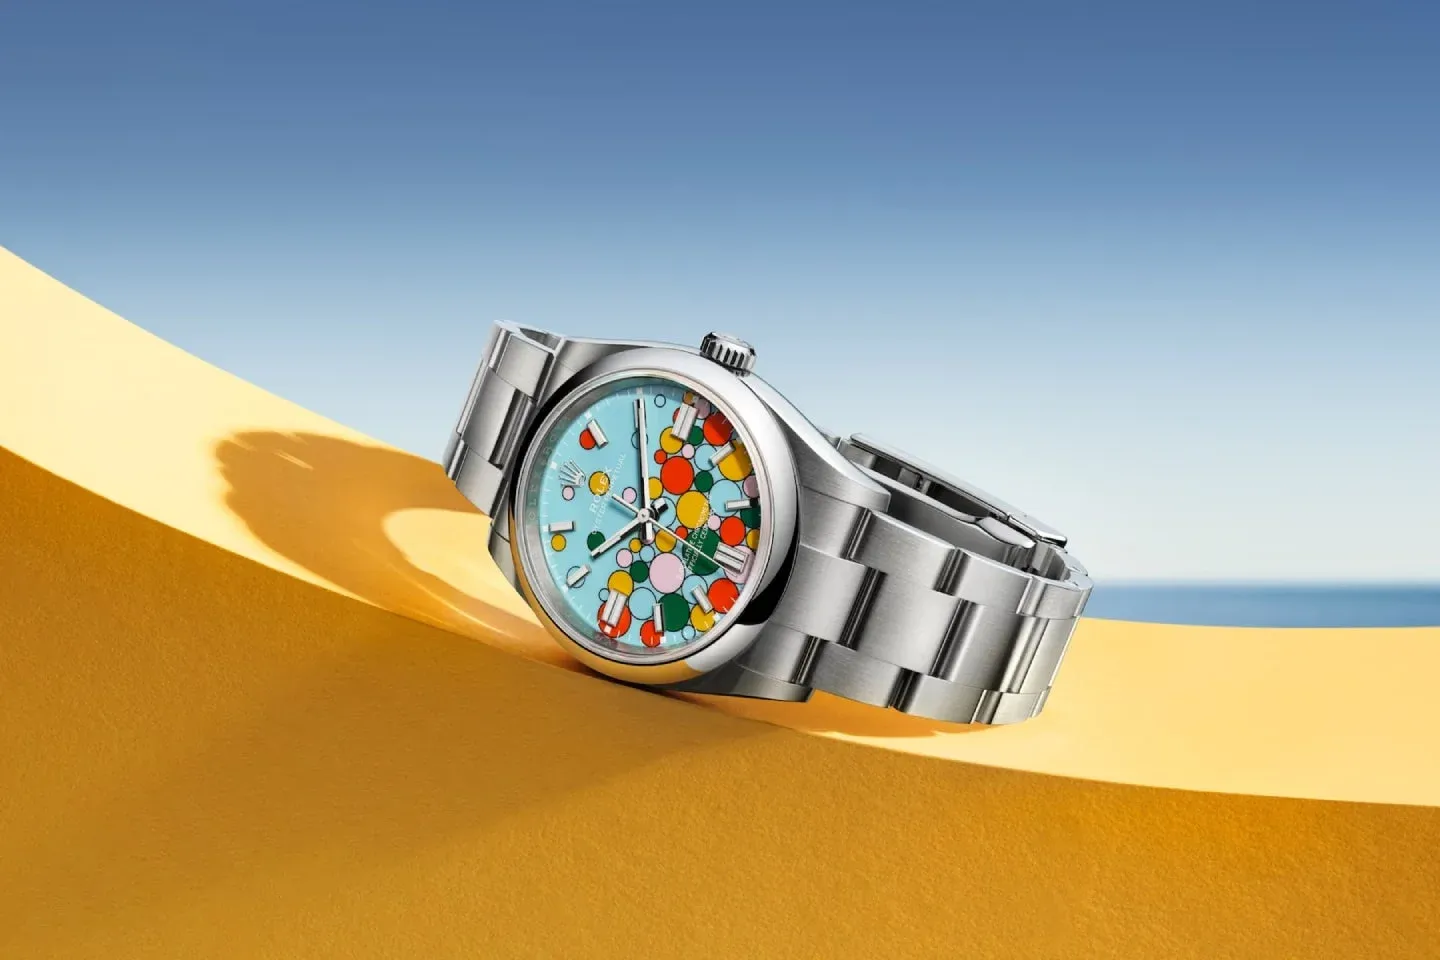 Colored dials have been making headlines in 2023. Releases like the Rolex Oyster Perpetual which featured a ‘Celebration Motif’ dial dotted with many coloured bubbles were a surprise